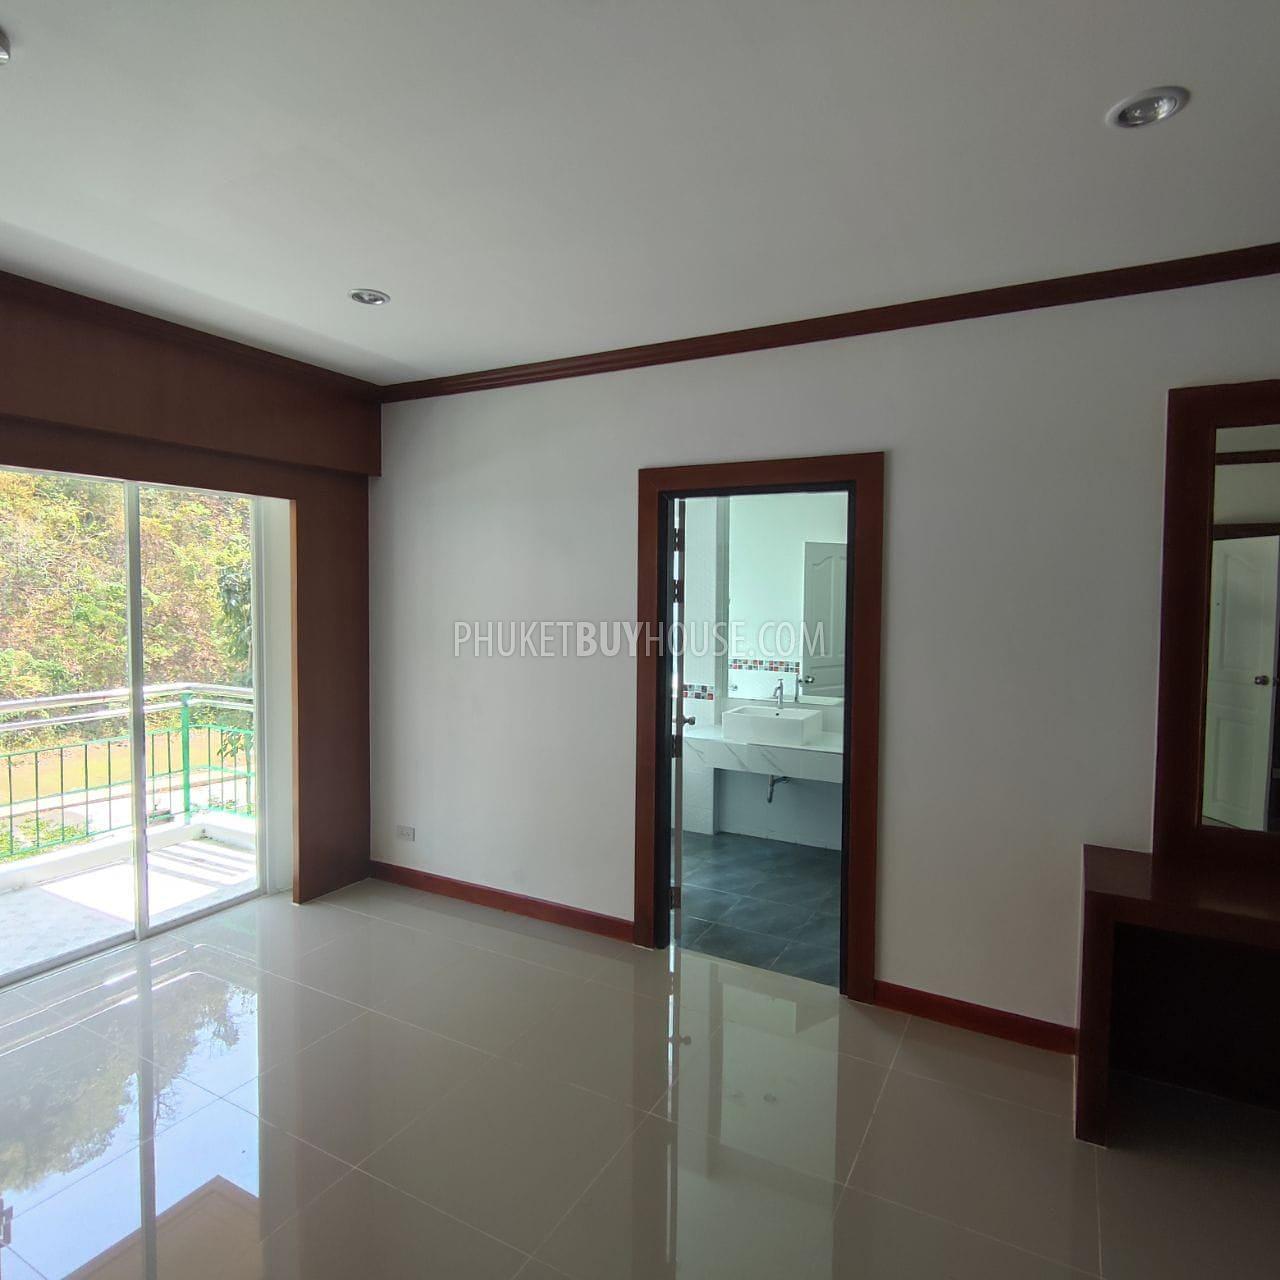 PHU22062: Excellent Three Bedroom Apartment for Sale Near Central Festival Floresta. Photo #3